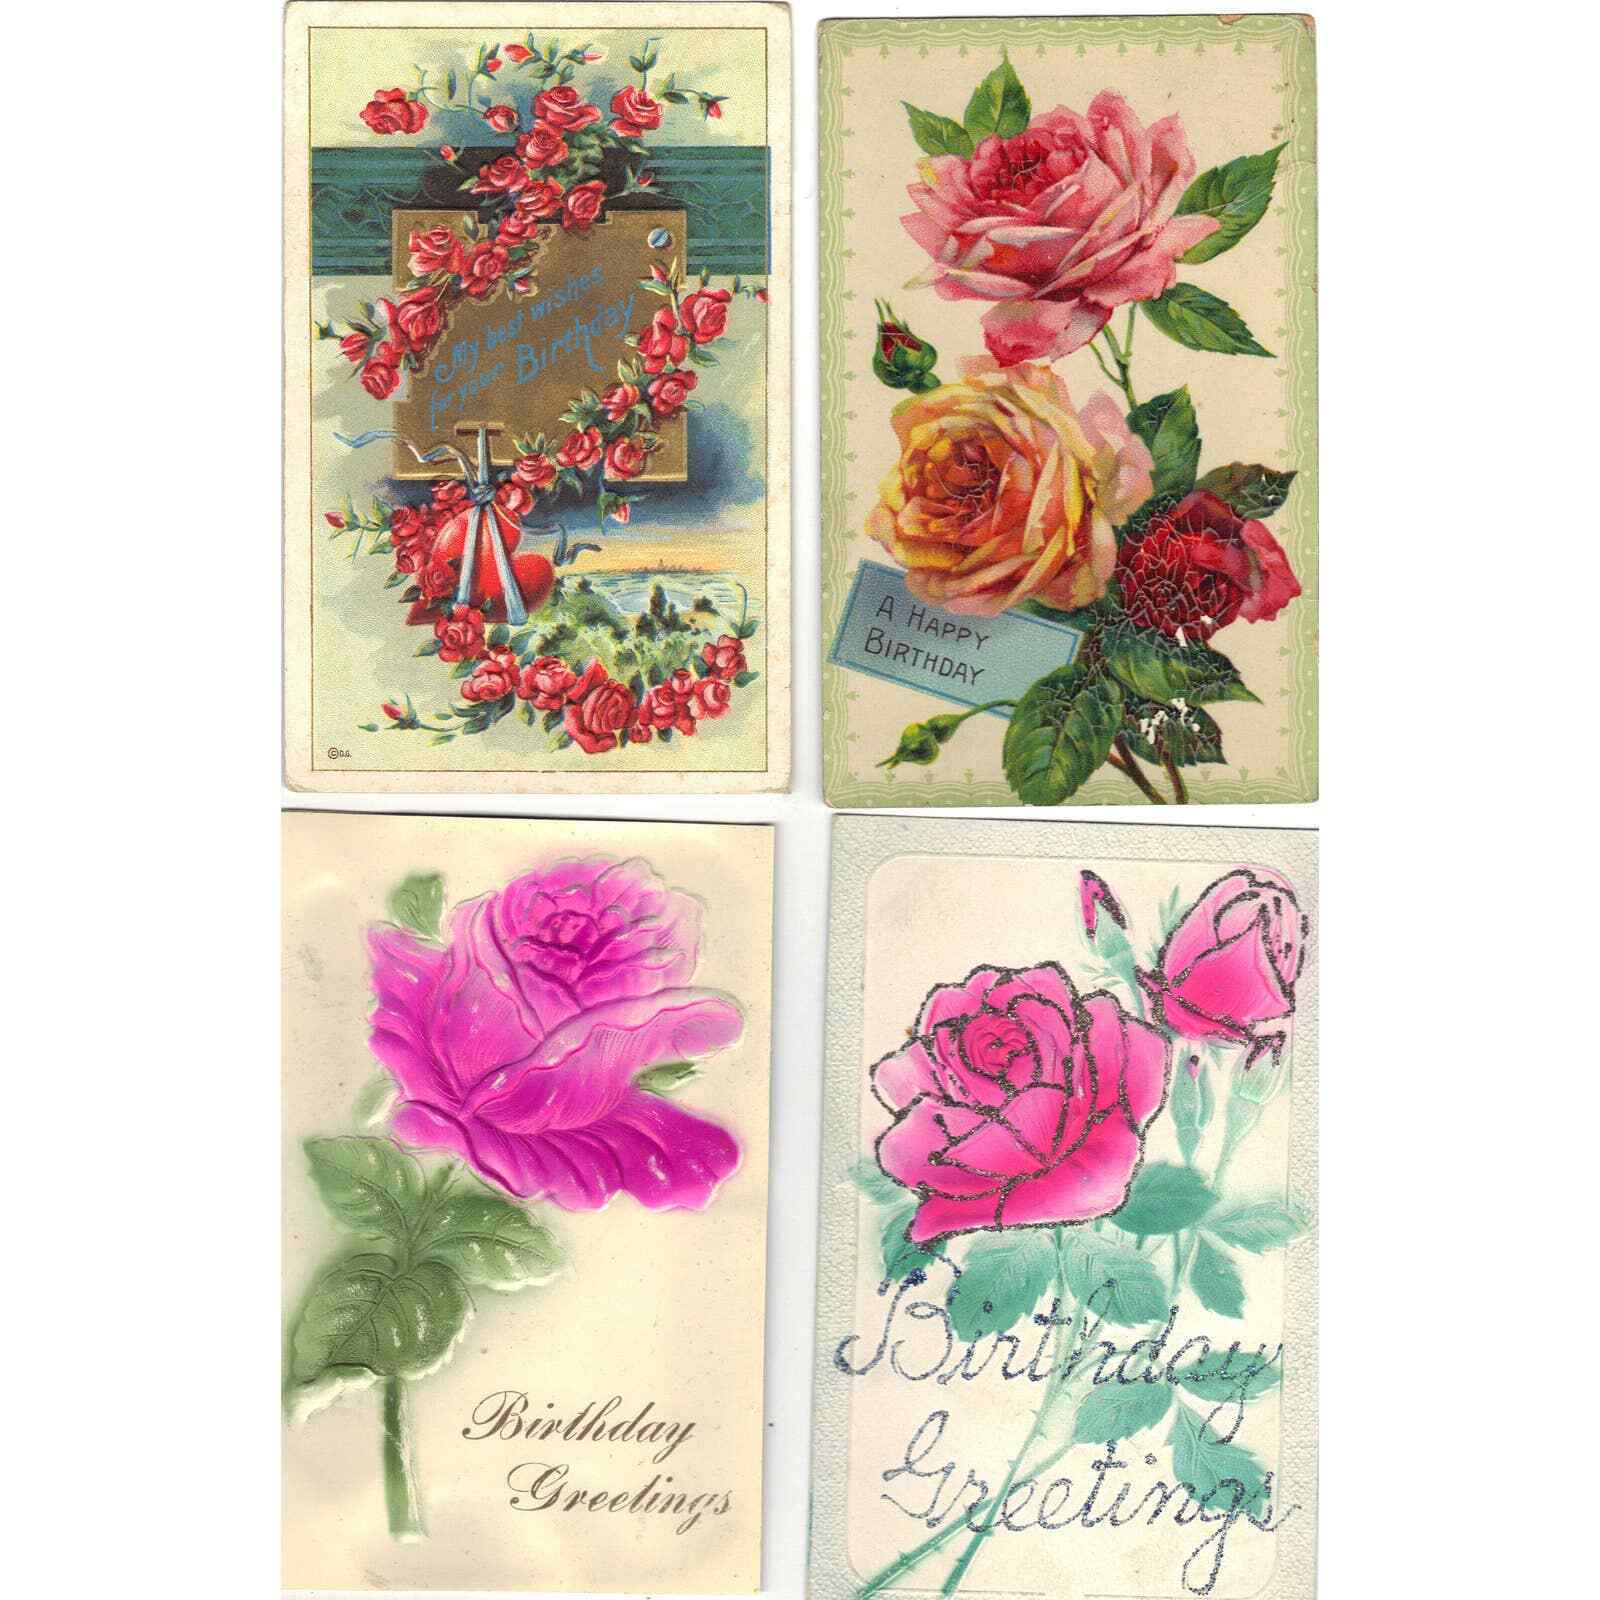 Lot of 4 Antique Birthday Postcards with Flowers - Lot 1030